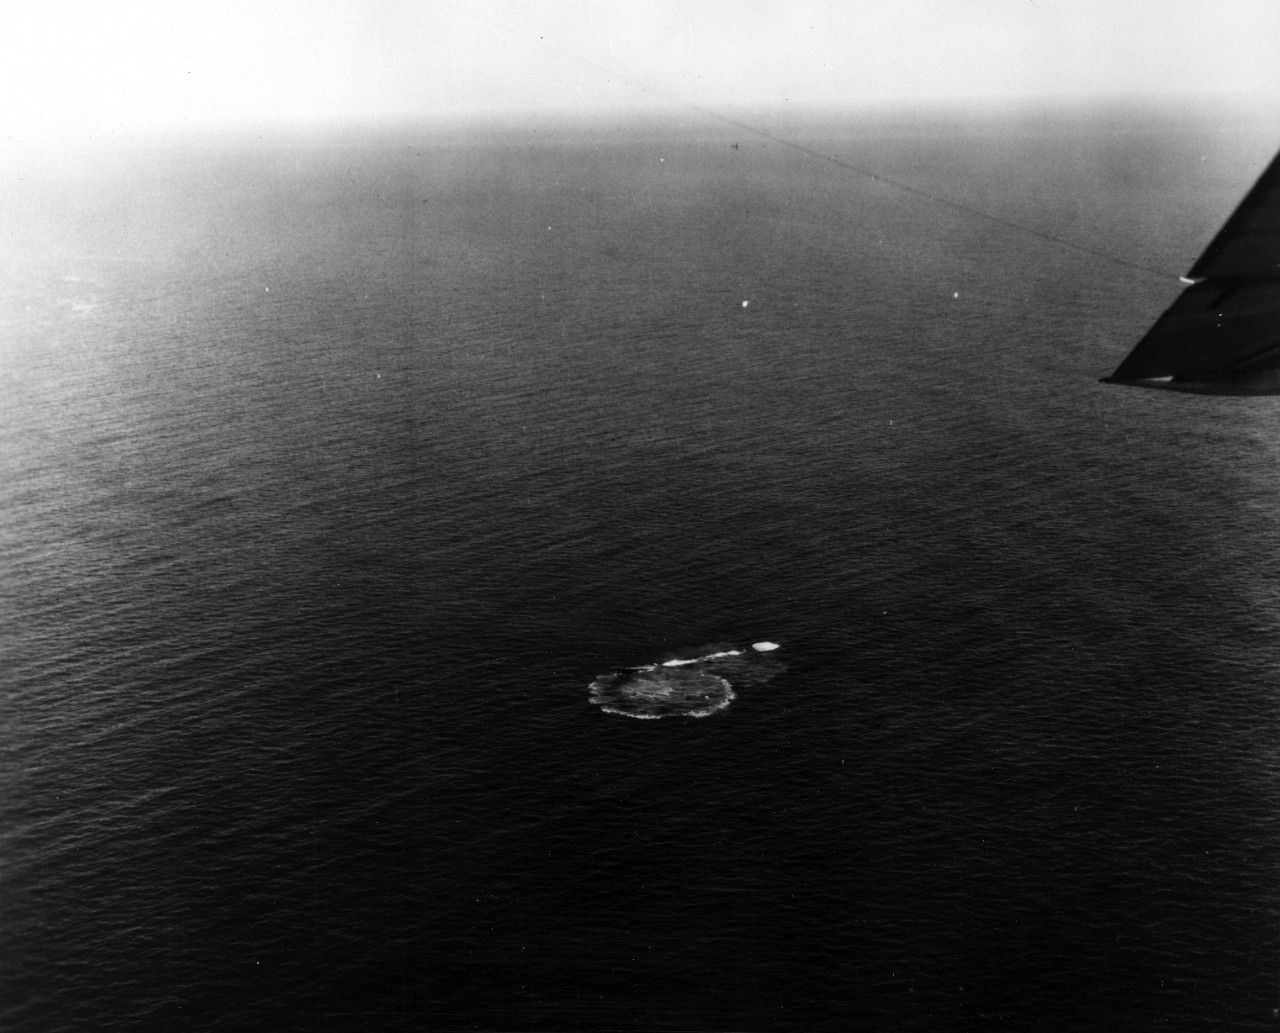 USS Bass (SS-164) sinks off Block Island, NY, during tests. Photographed by aircraft of Anti-Submarine Development Detachment, Air Force, U.S. Atlantic Fleet.